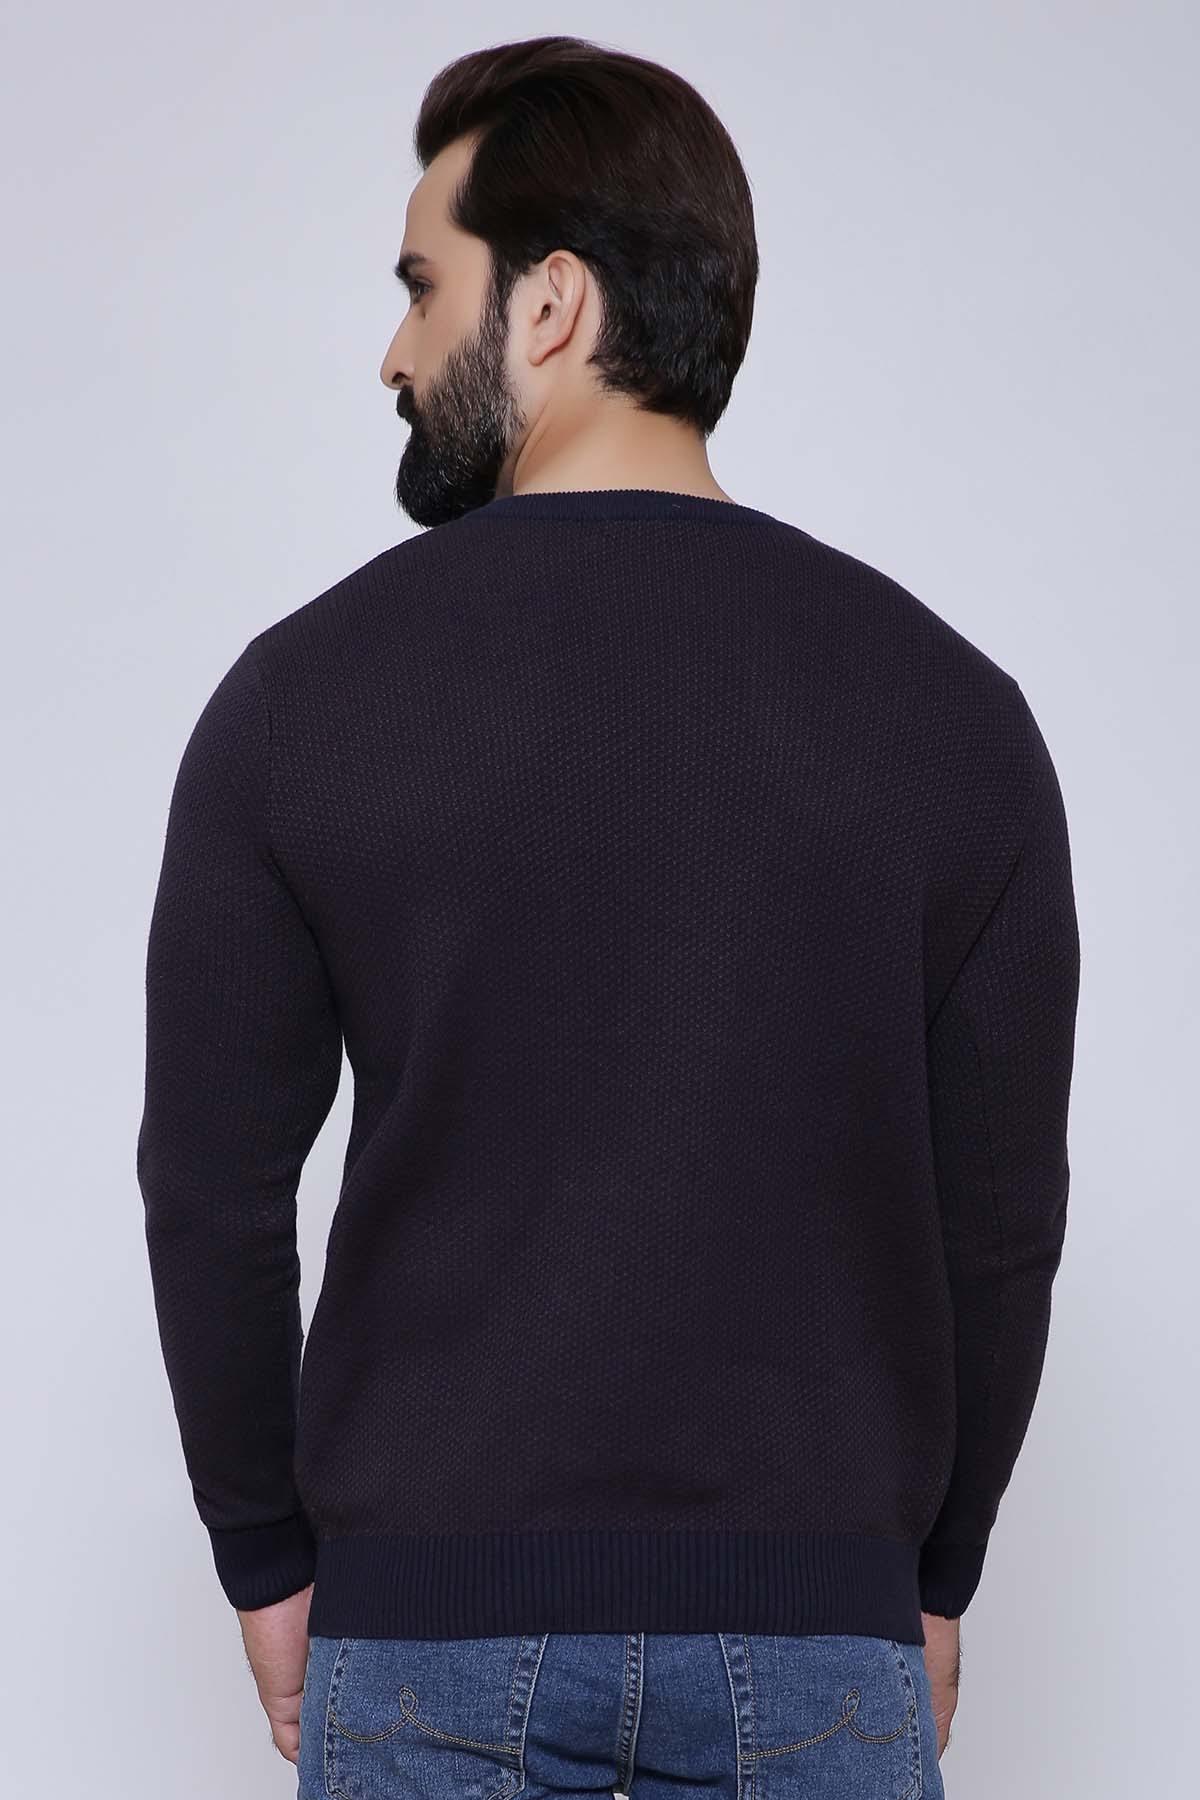 SWEATER V NECK FULL SLEEVE NAVY BROWN at Charcoal Clothing